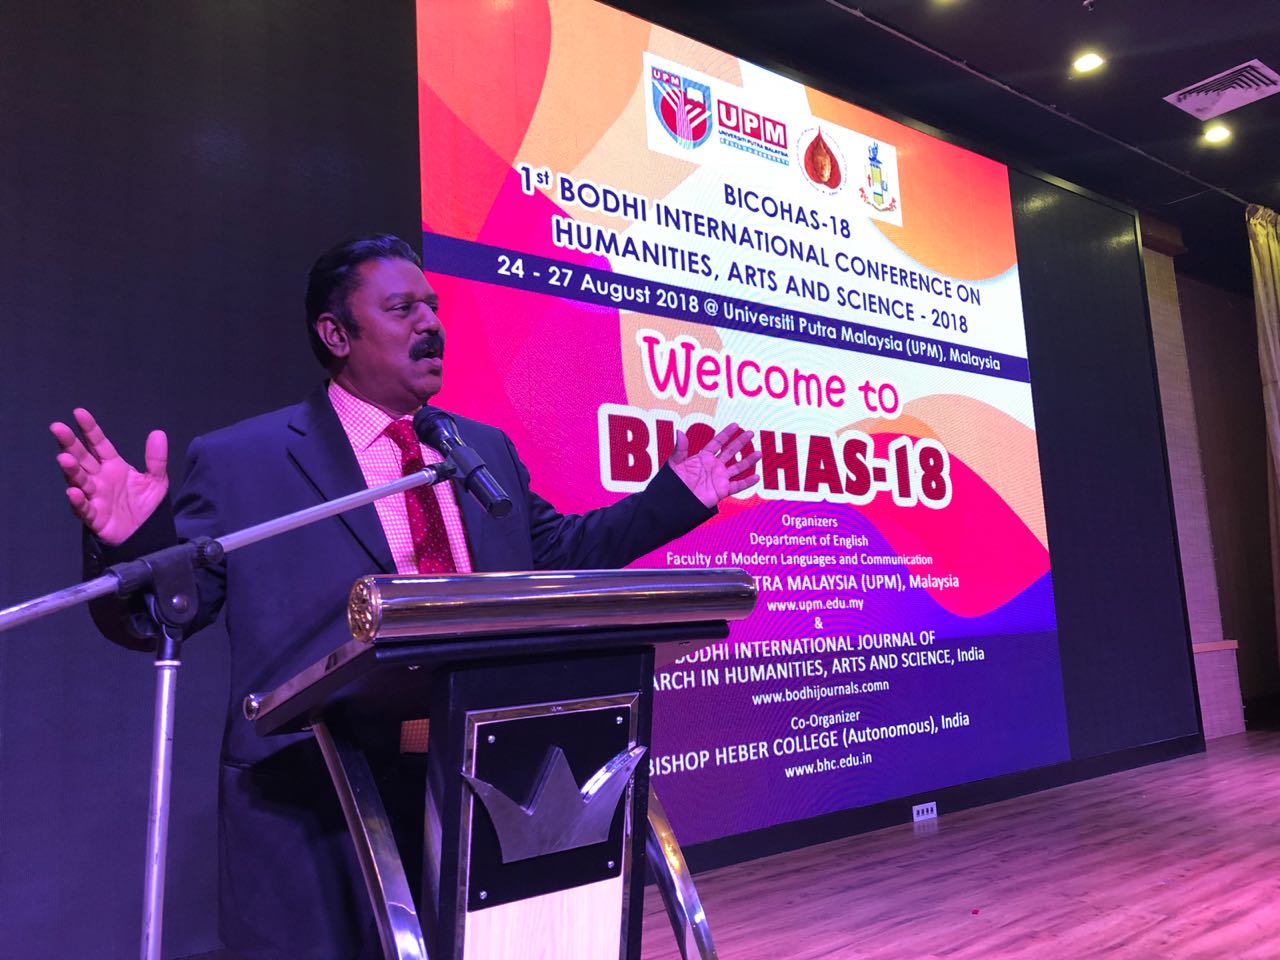 1st Bodhi International Conference on Humanities, Arts and Science - 2018  (BICOHAS-18)